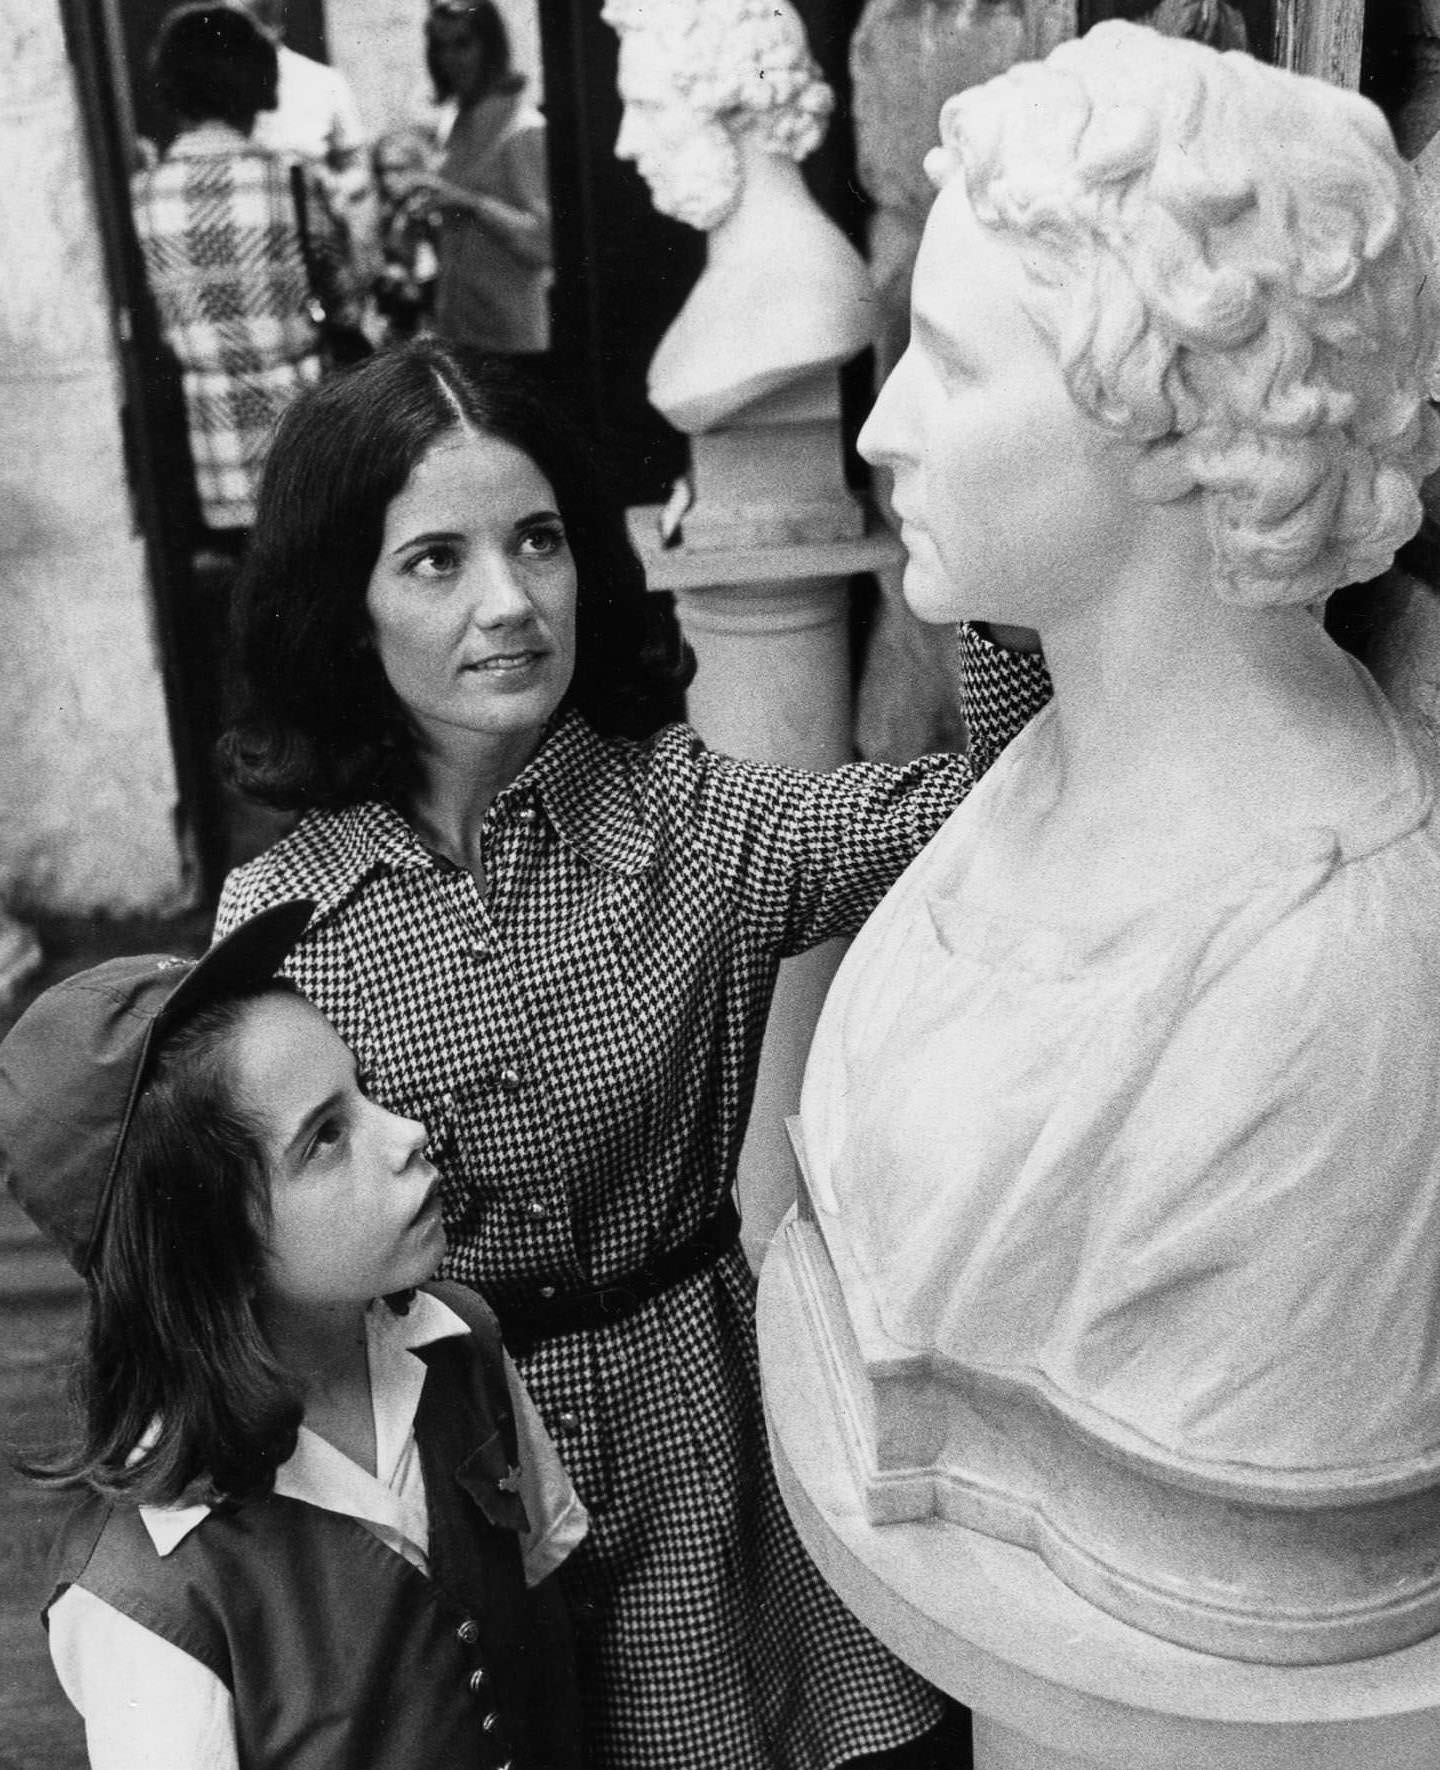 Visitors and bust of Elisabet Ney at the Elisabet Ney Museum, 1969